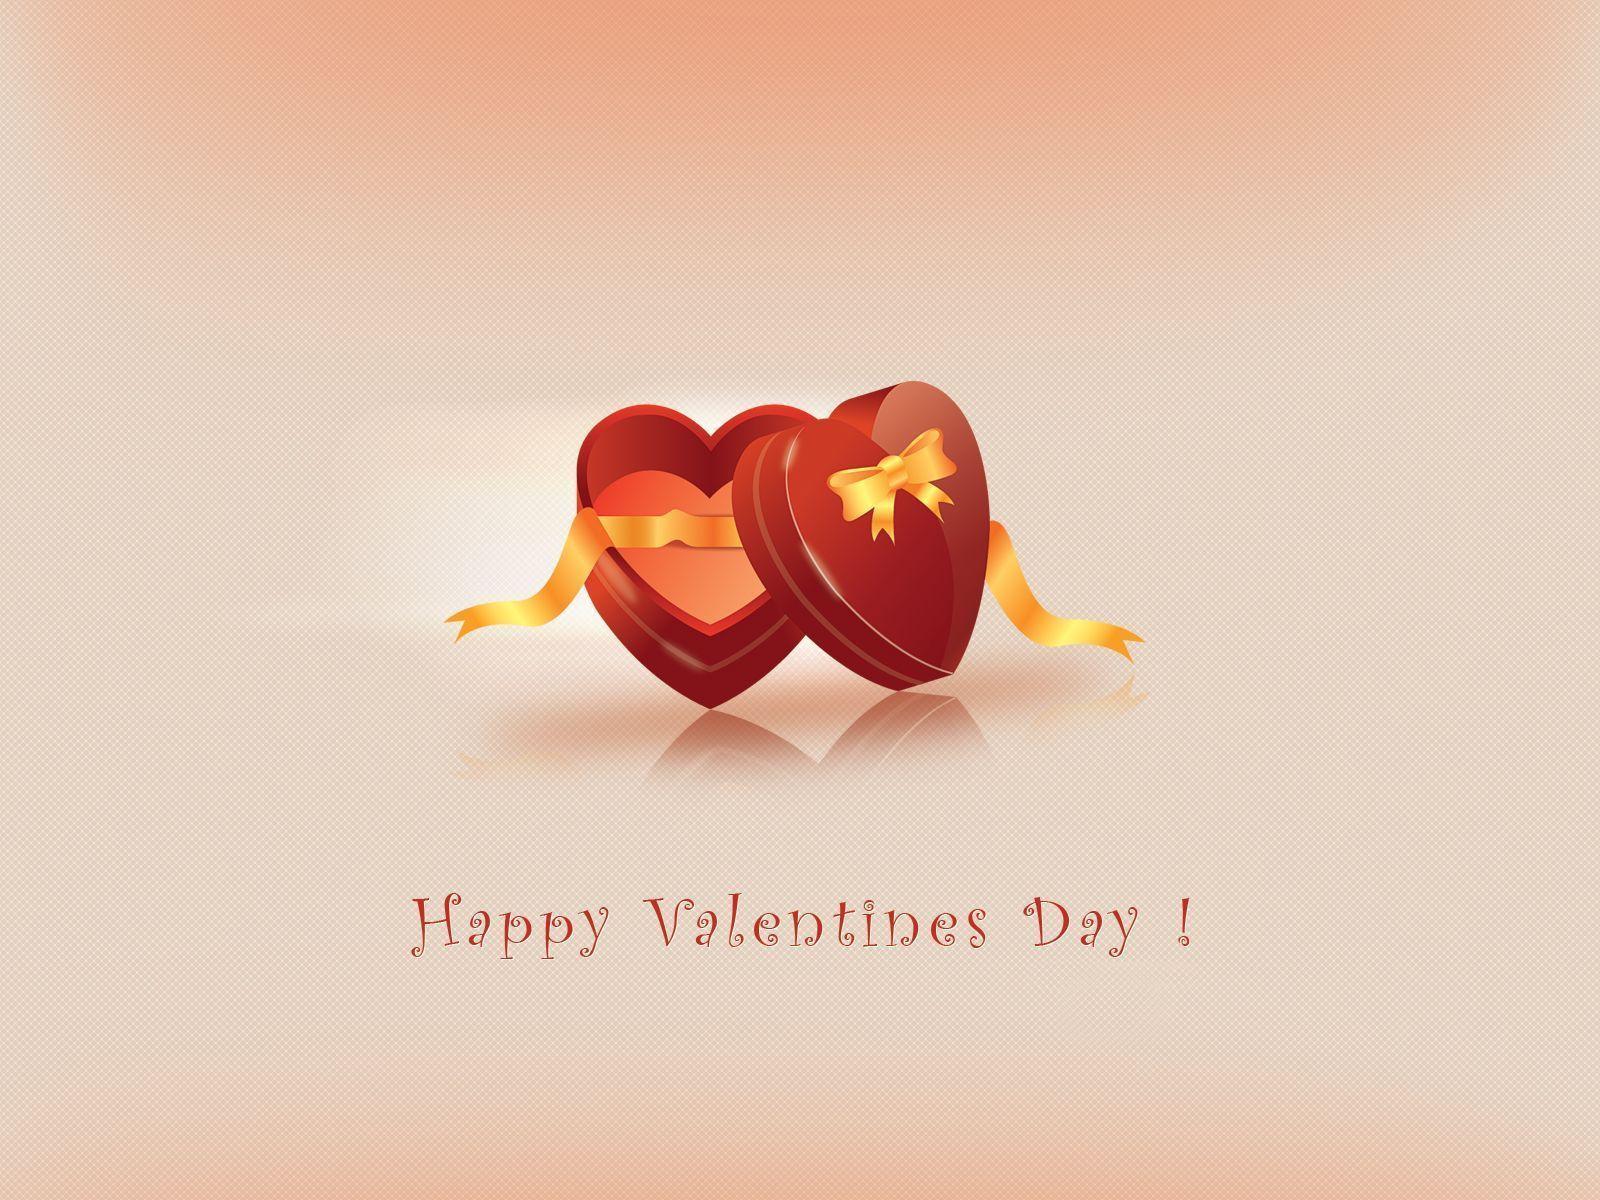 Happy Valentines Day with Two Read Hearts Hug Wallpaper and Photo